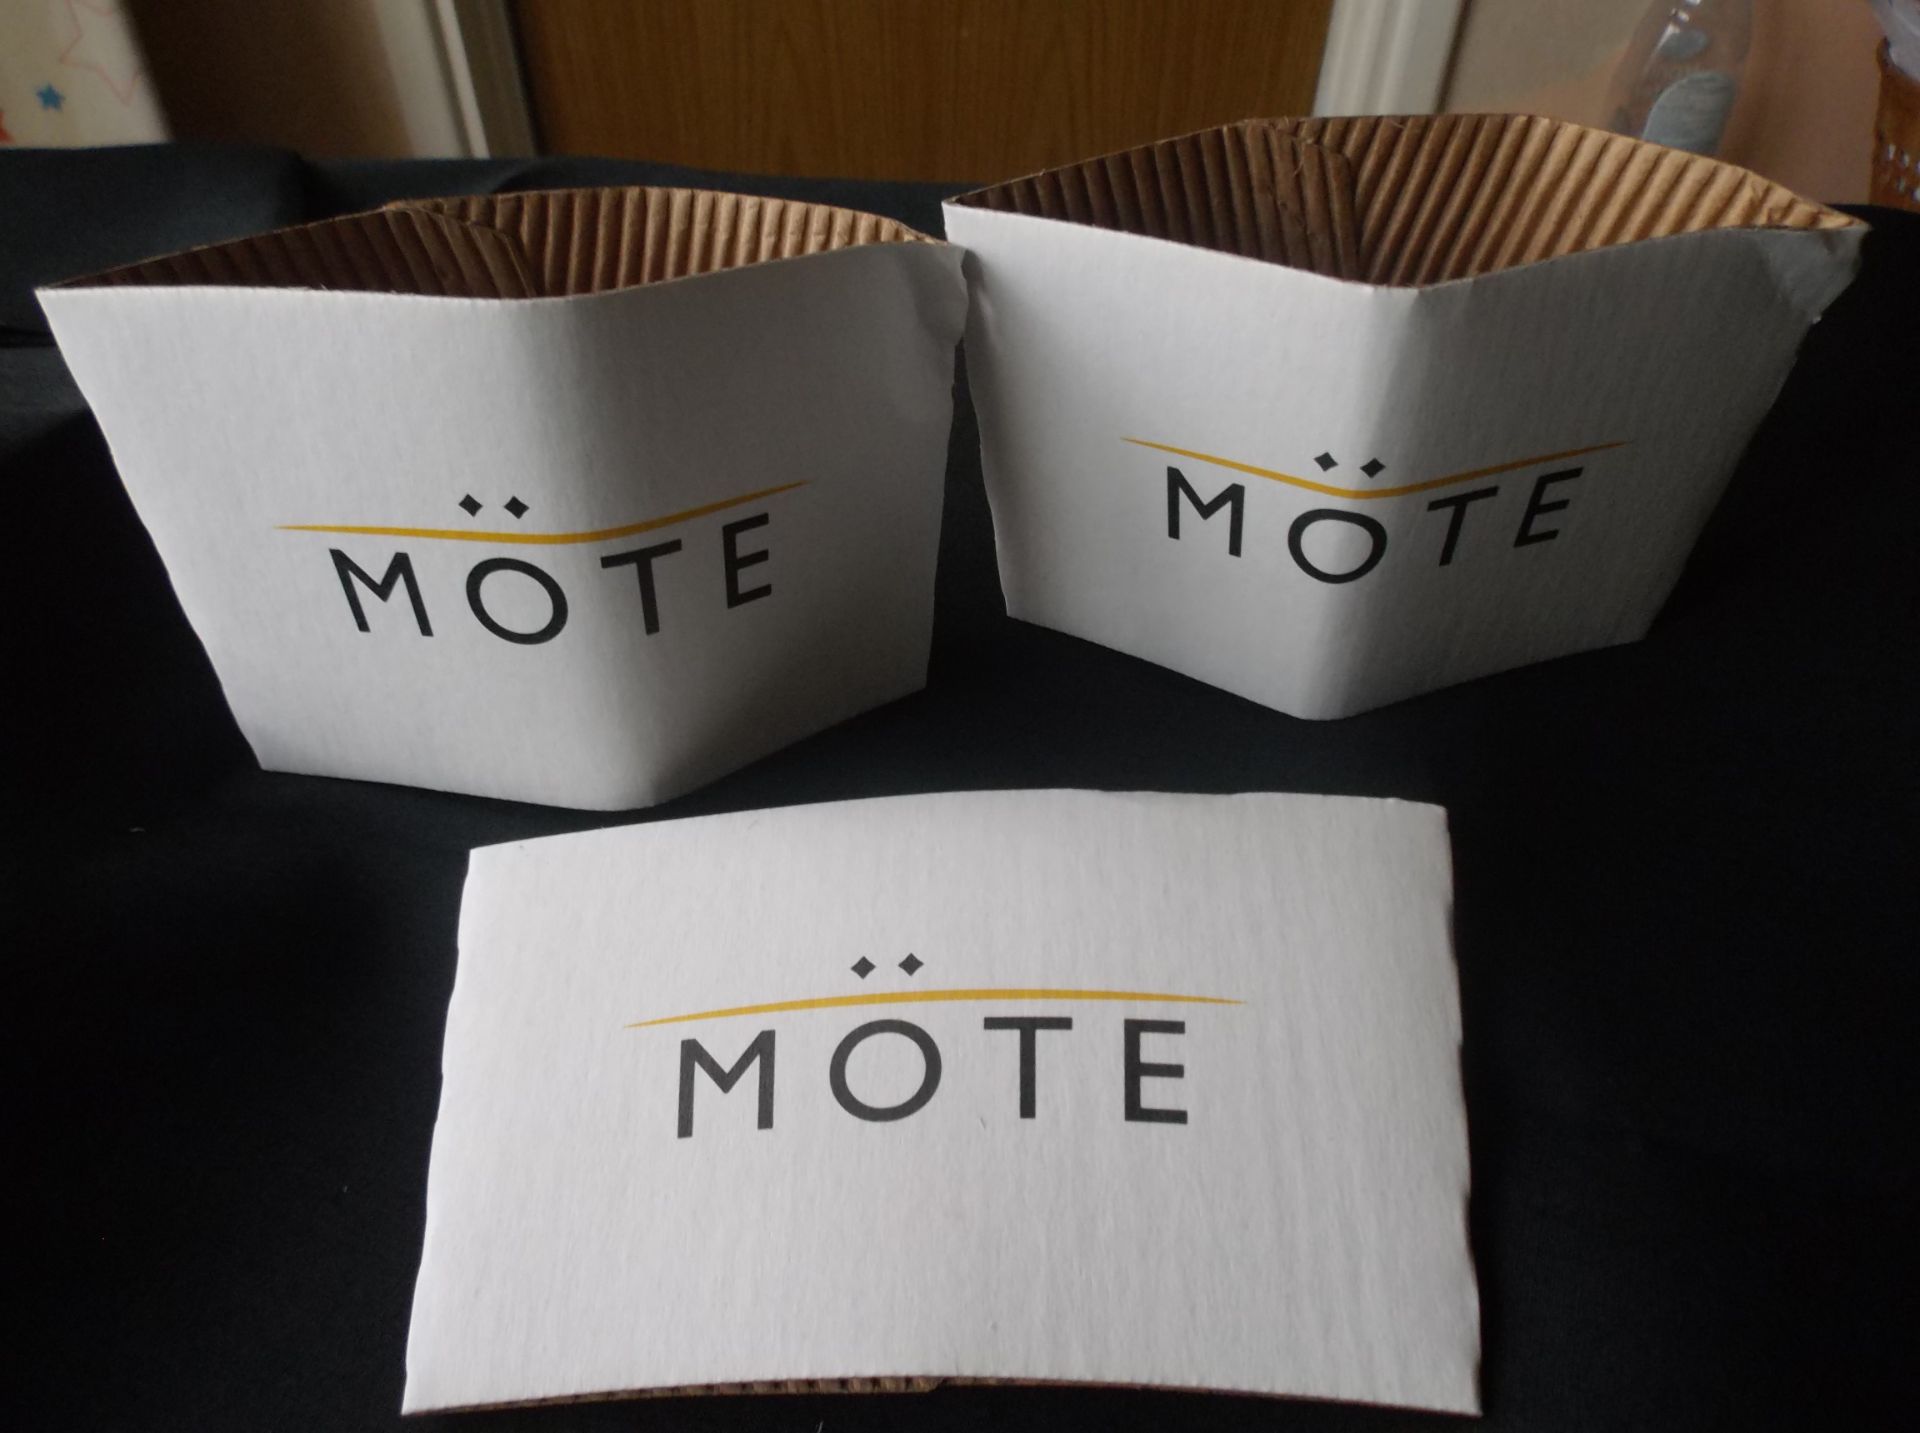 1 Bx Of 1,000 Mote Cup Cluches/Holders 12Oz-16Oz - Image 2 of 3